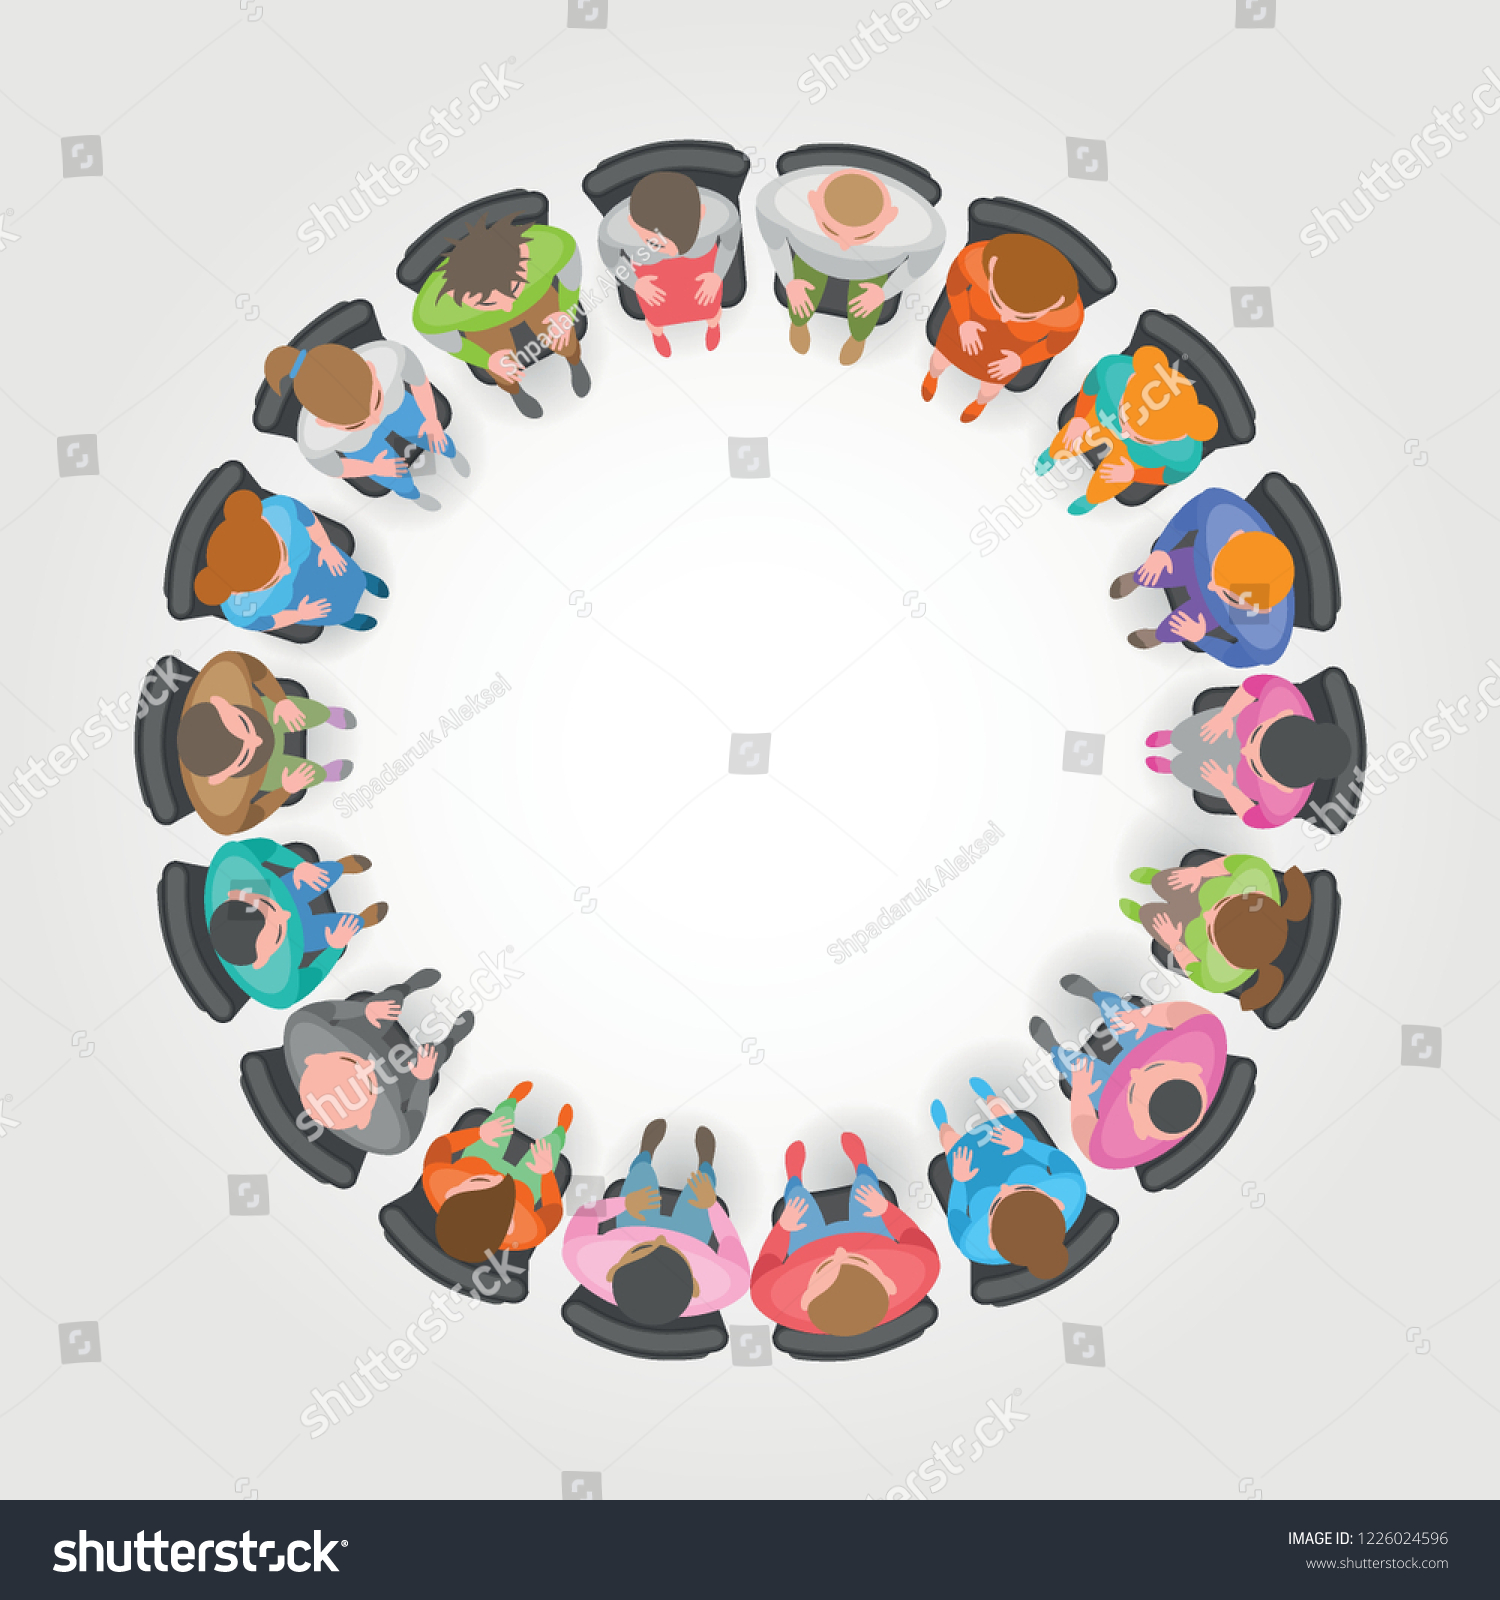 SVG of Vector illustration. People sit in a circle. Top view. Different men and women are sitting in chairs. View from above. svg